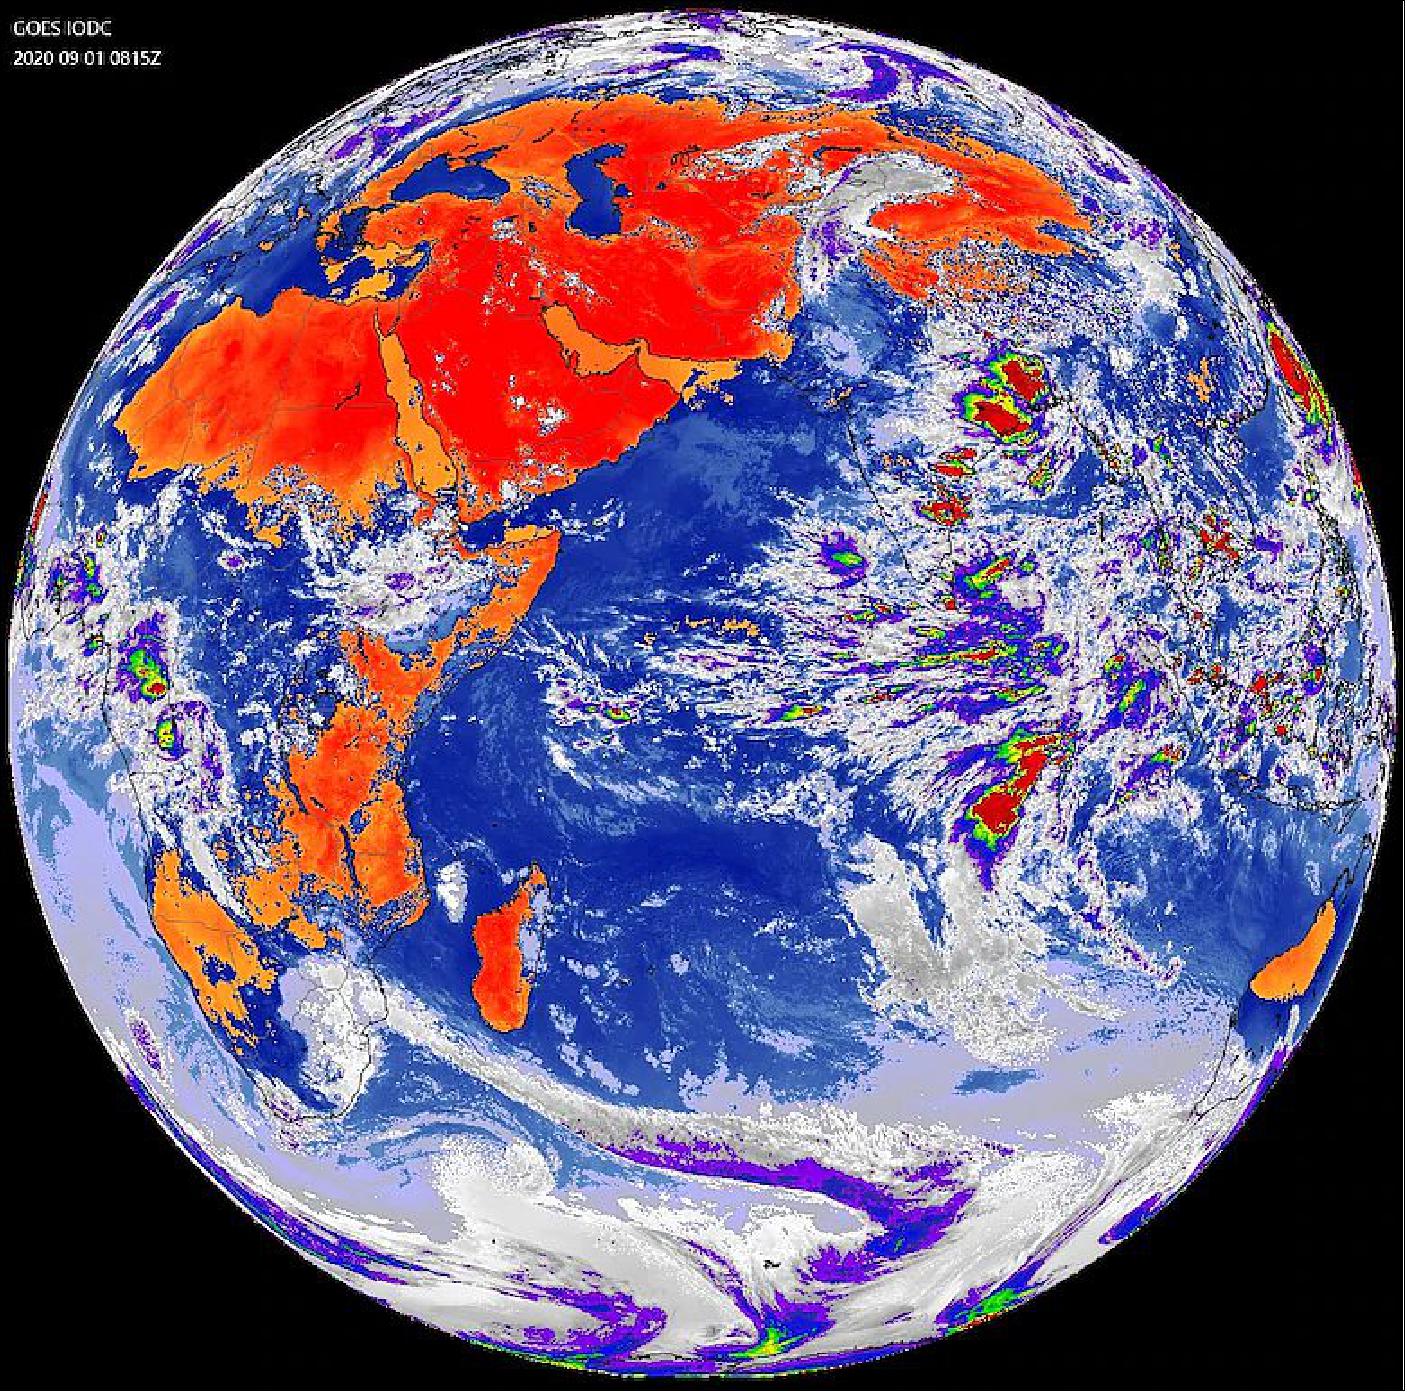 Figure 8: A view of the Earth from the EWS-G1 satellite taken on September 1, 2020. Originally launched in 2006 as GOES-13, the satellite provided operational weather coverage over the United States’ East Coast for 10 years before being replaced in the GOES-East position by GOES-16. The transfer to the Department of Defense and relocation of EWS-G1 is the culmination of joint efforts between SMC, NOAA and NASA. (image credit: U.S. Space Force’s MARK IV-B Program Office)